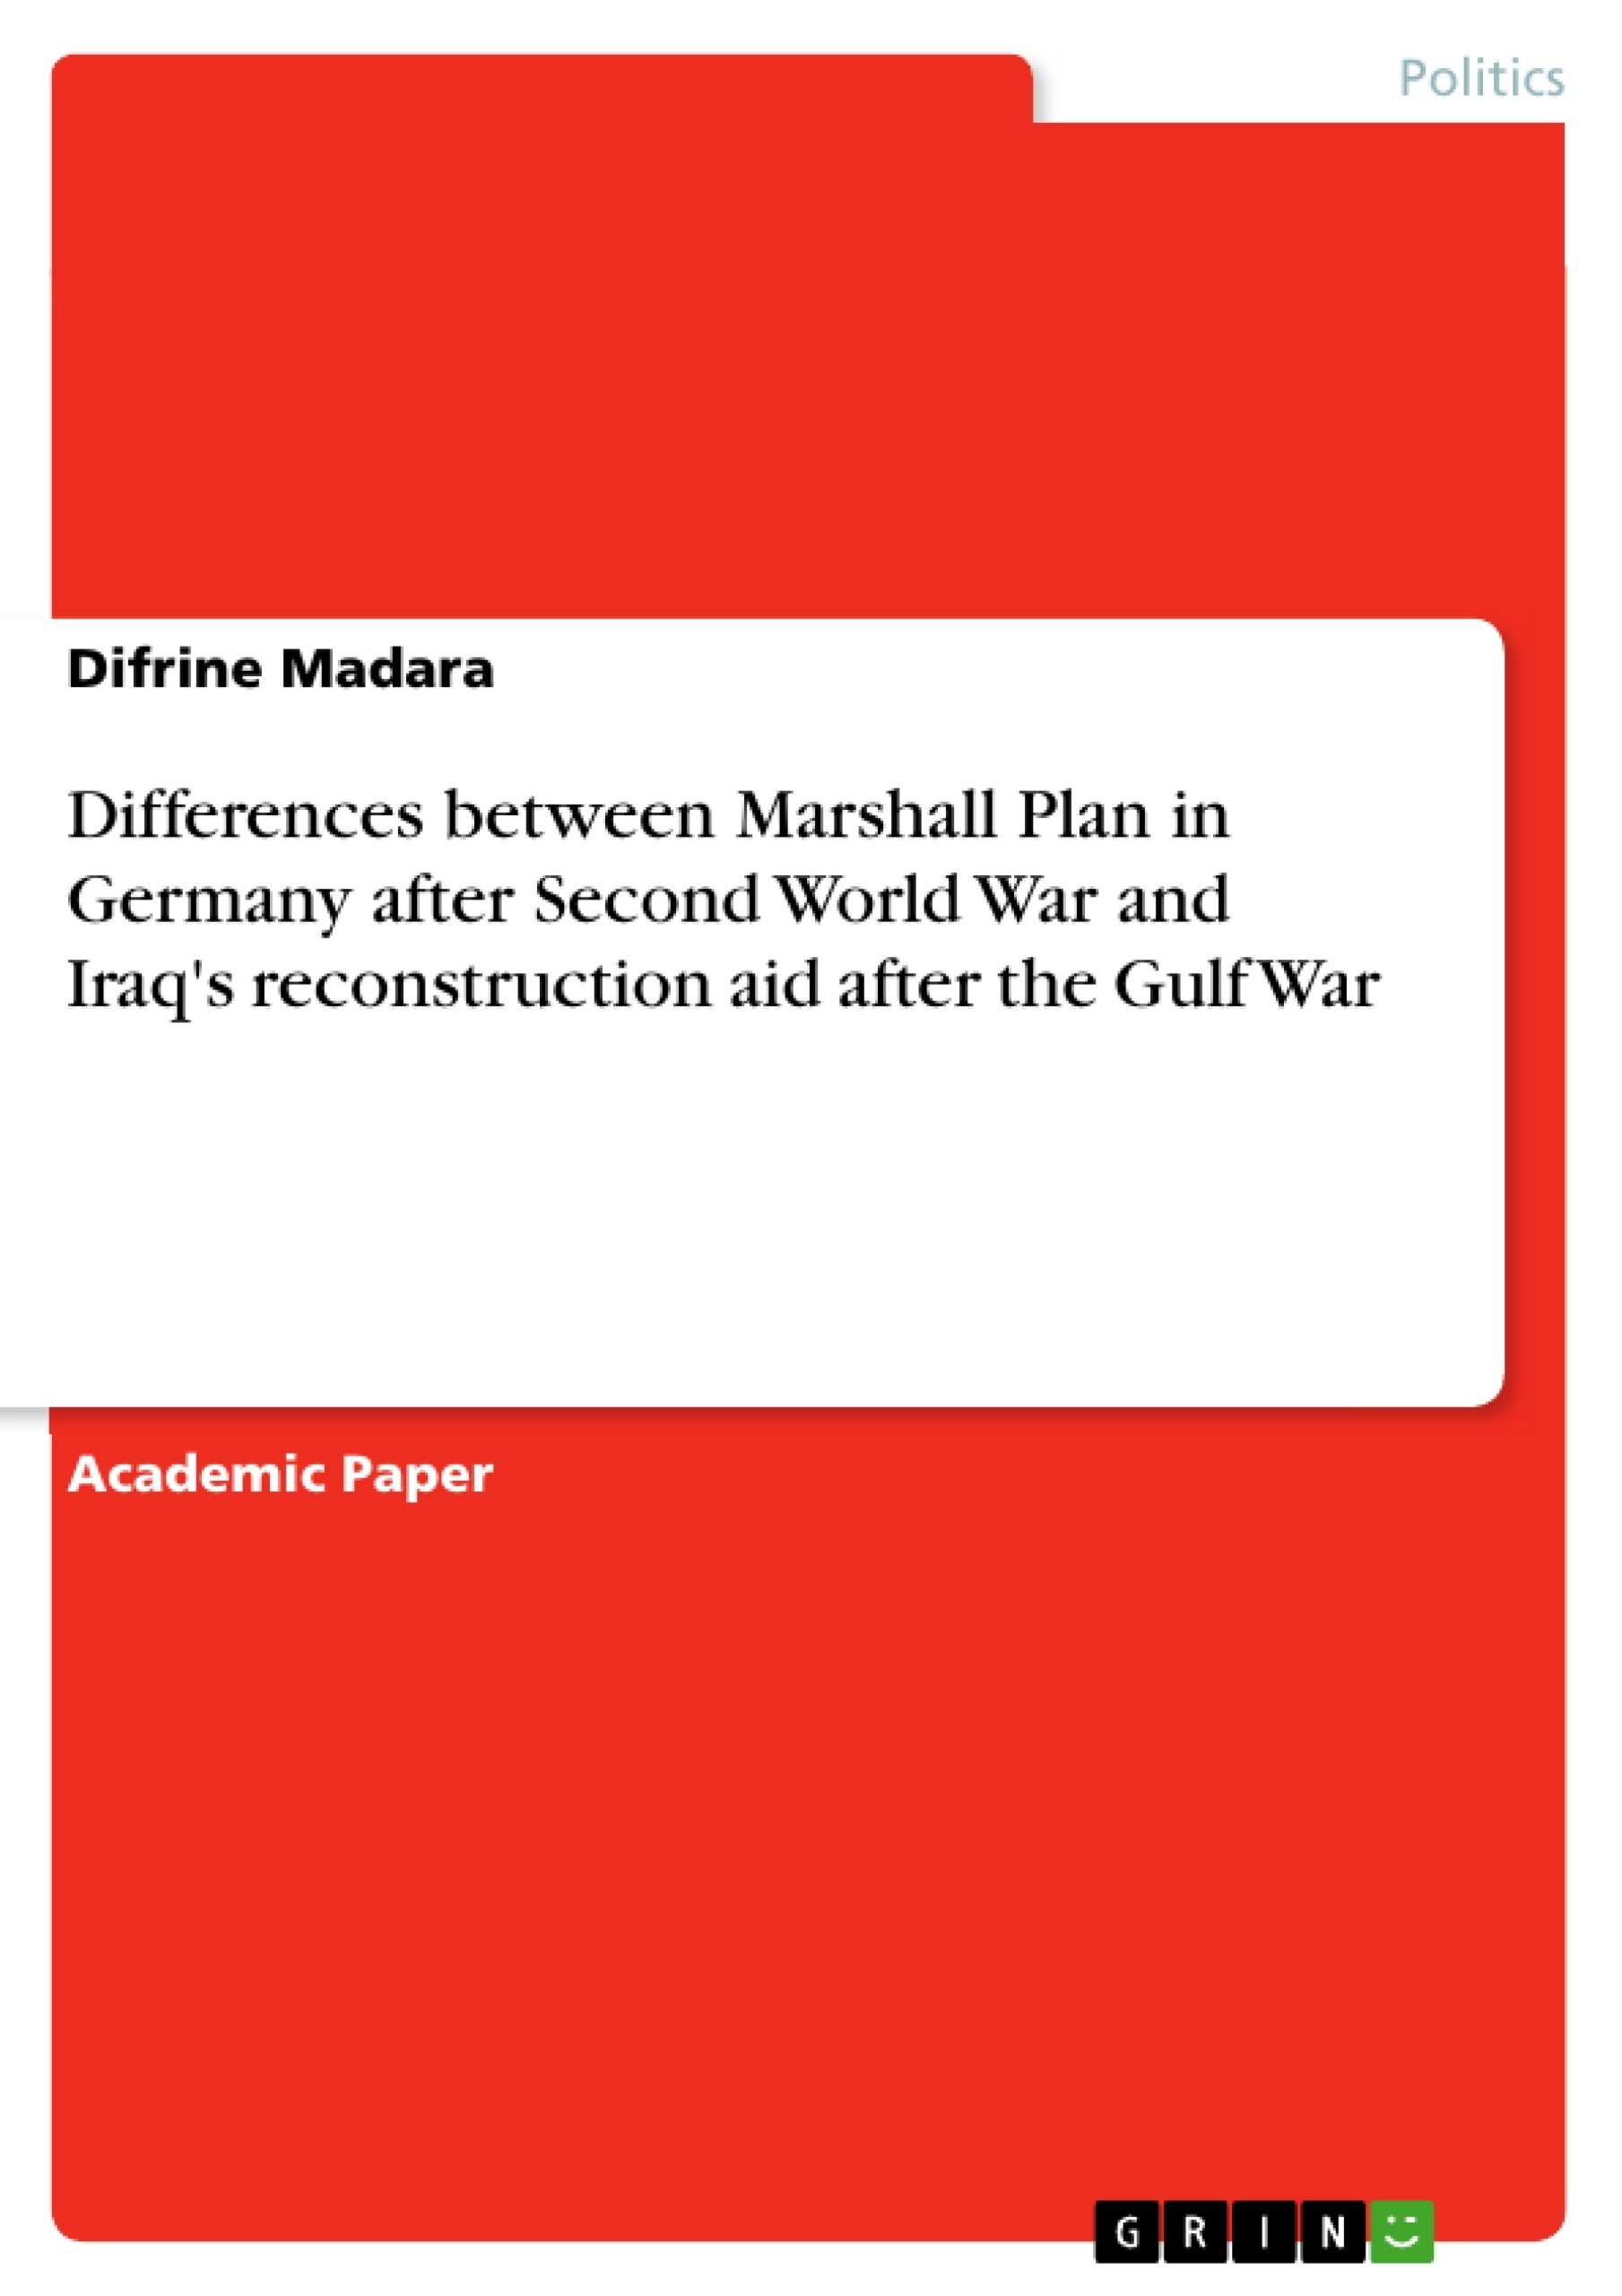 Título: Differences between Marshall Plan in Germany after Second World War and Iraq's reconstruction aid after the Gulf War